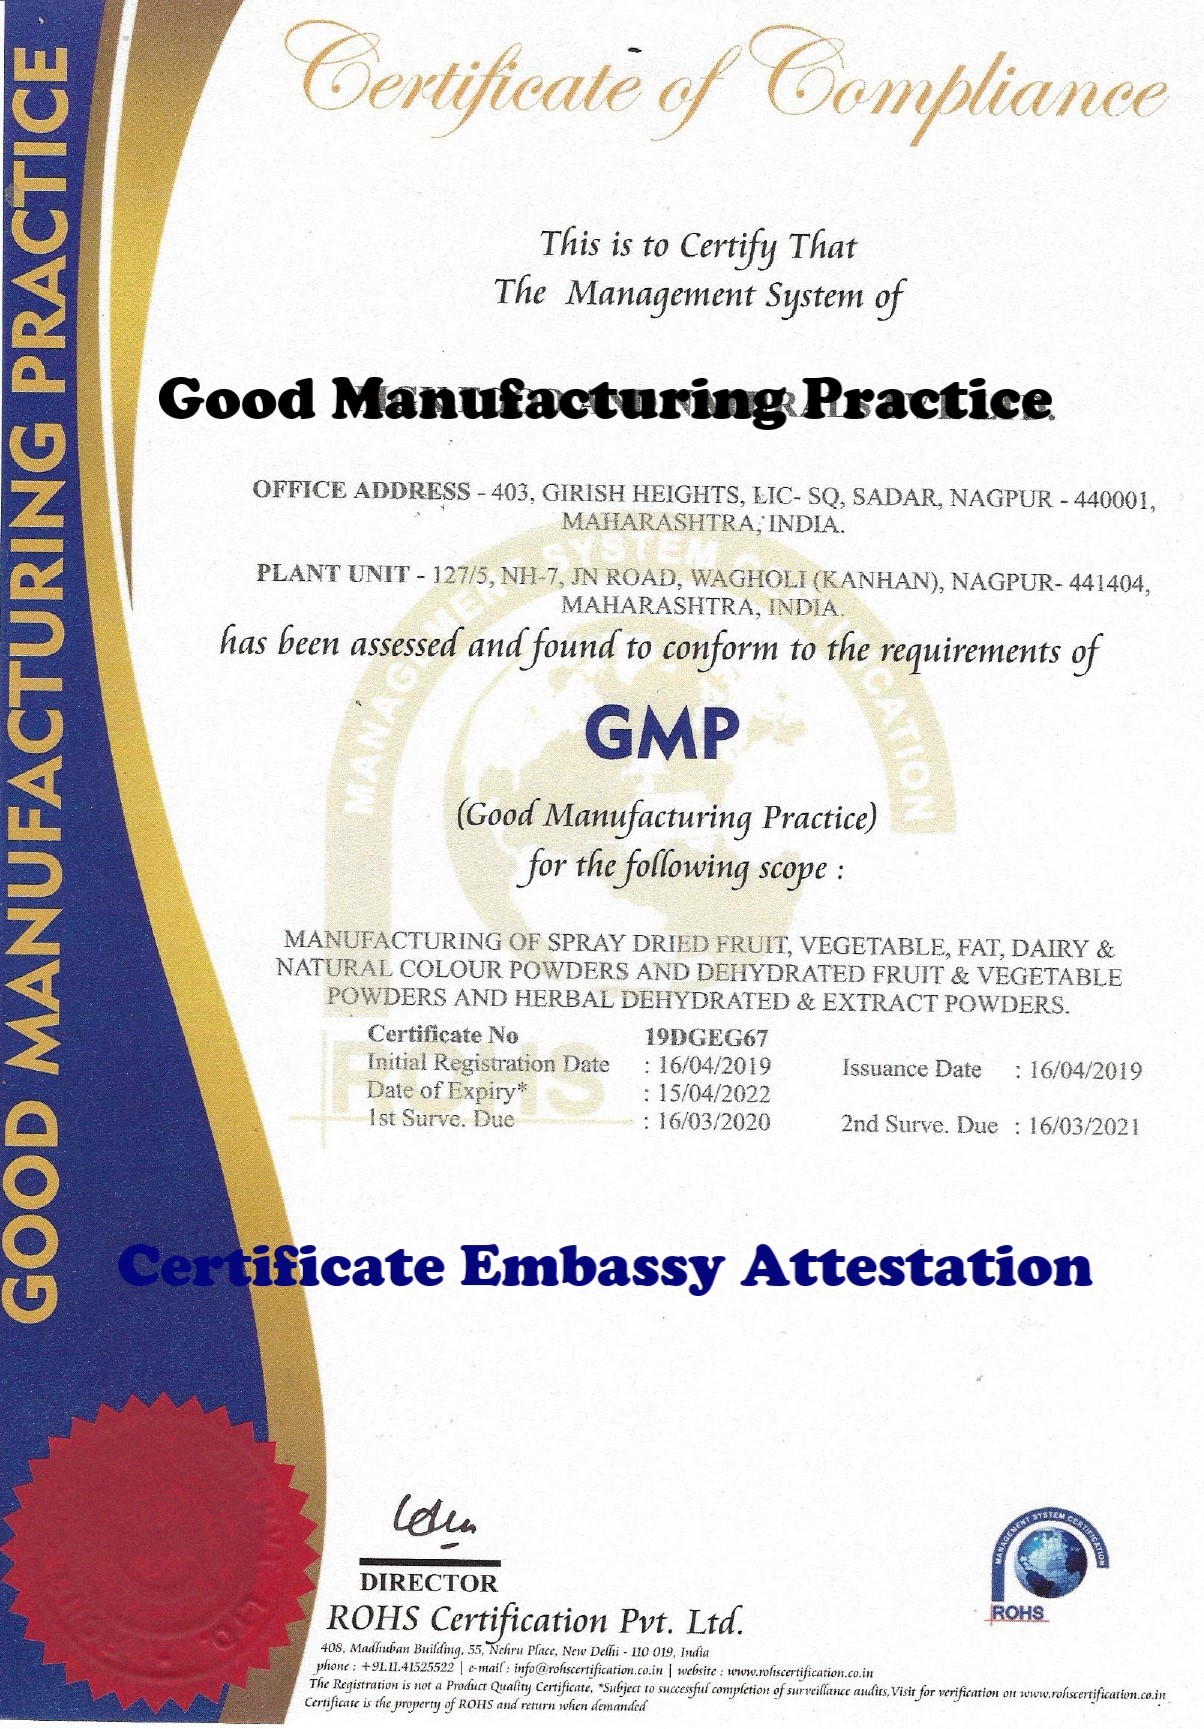 GMP Certificate Attestation from Brunei Embassy